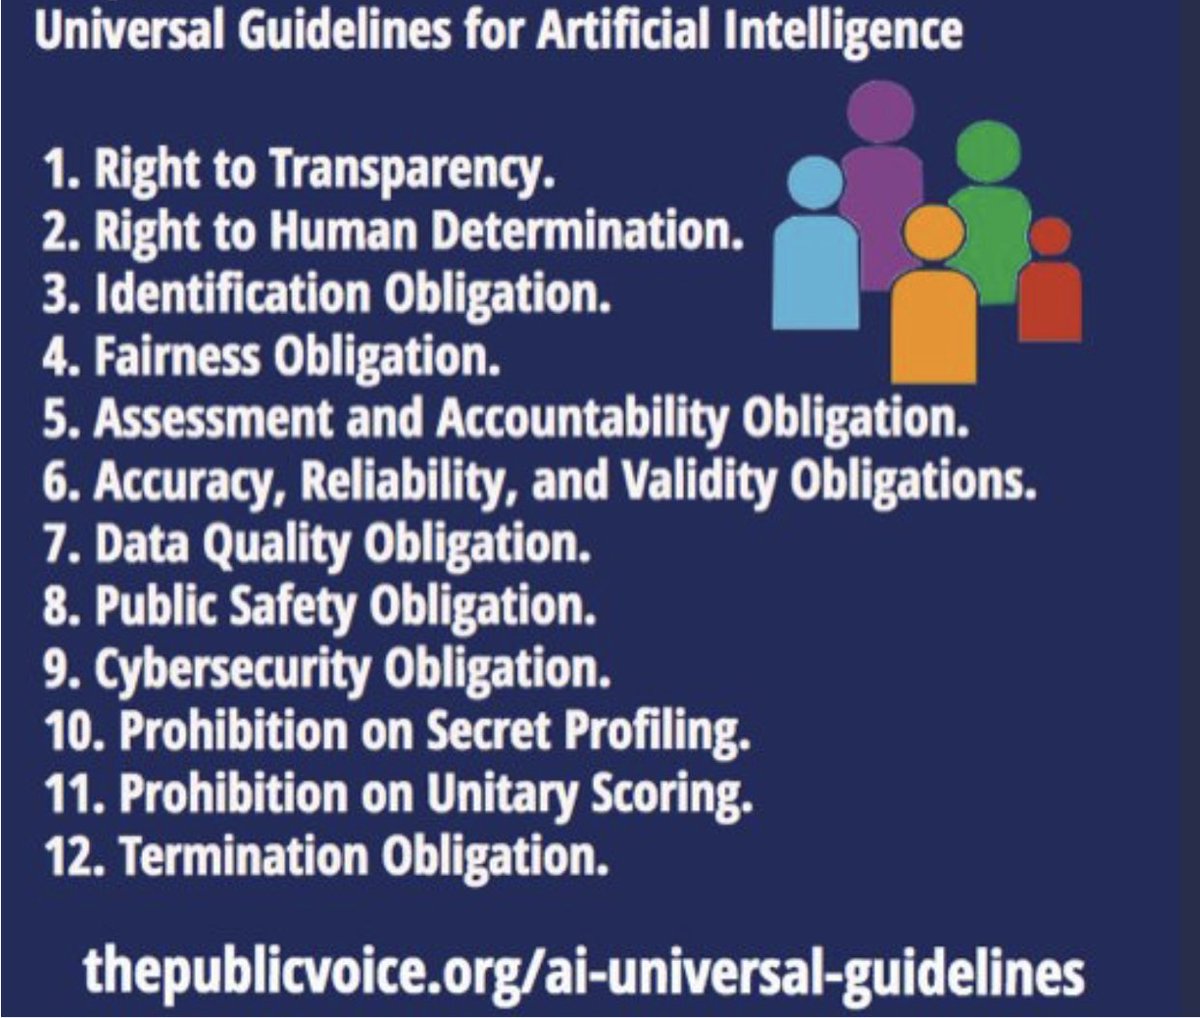 For the Senators, tech leaders & civil society colleagues at the AI Insight Forum, we offer ➡️The Universal Guidelines for AI (2018) 🔥 ➡️Comprehensive and robust💪 ➡️For the Governance of #AI 🤖 @SenSchumer @SenatorRounds @SenatorHeinrich @SenatorYoung #EnactALaw